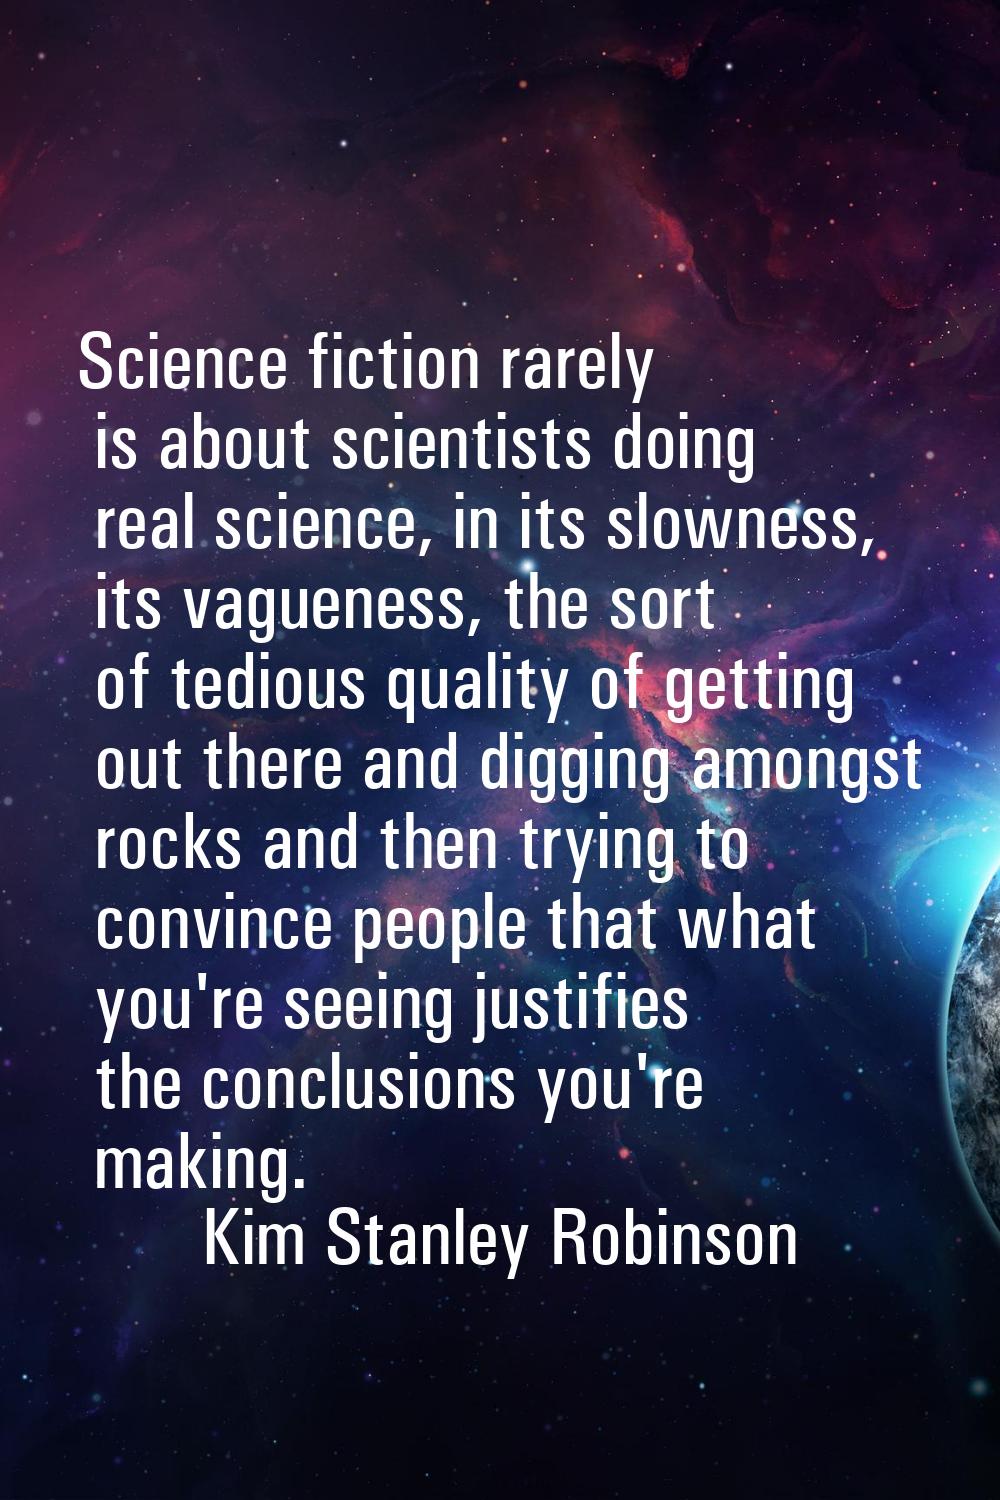 Science fiction rarely is about scientists doing real science, in its slowness, its vagueness, the 